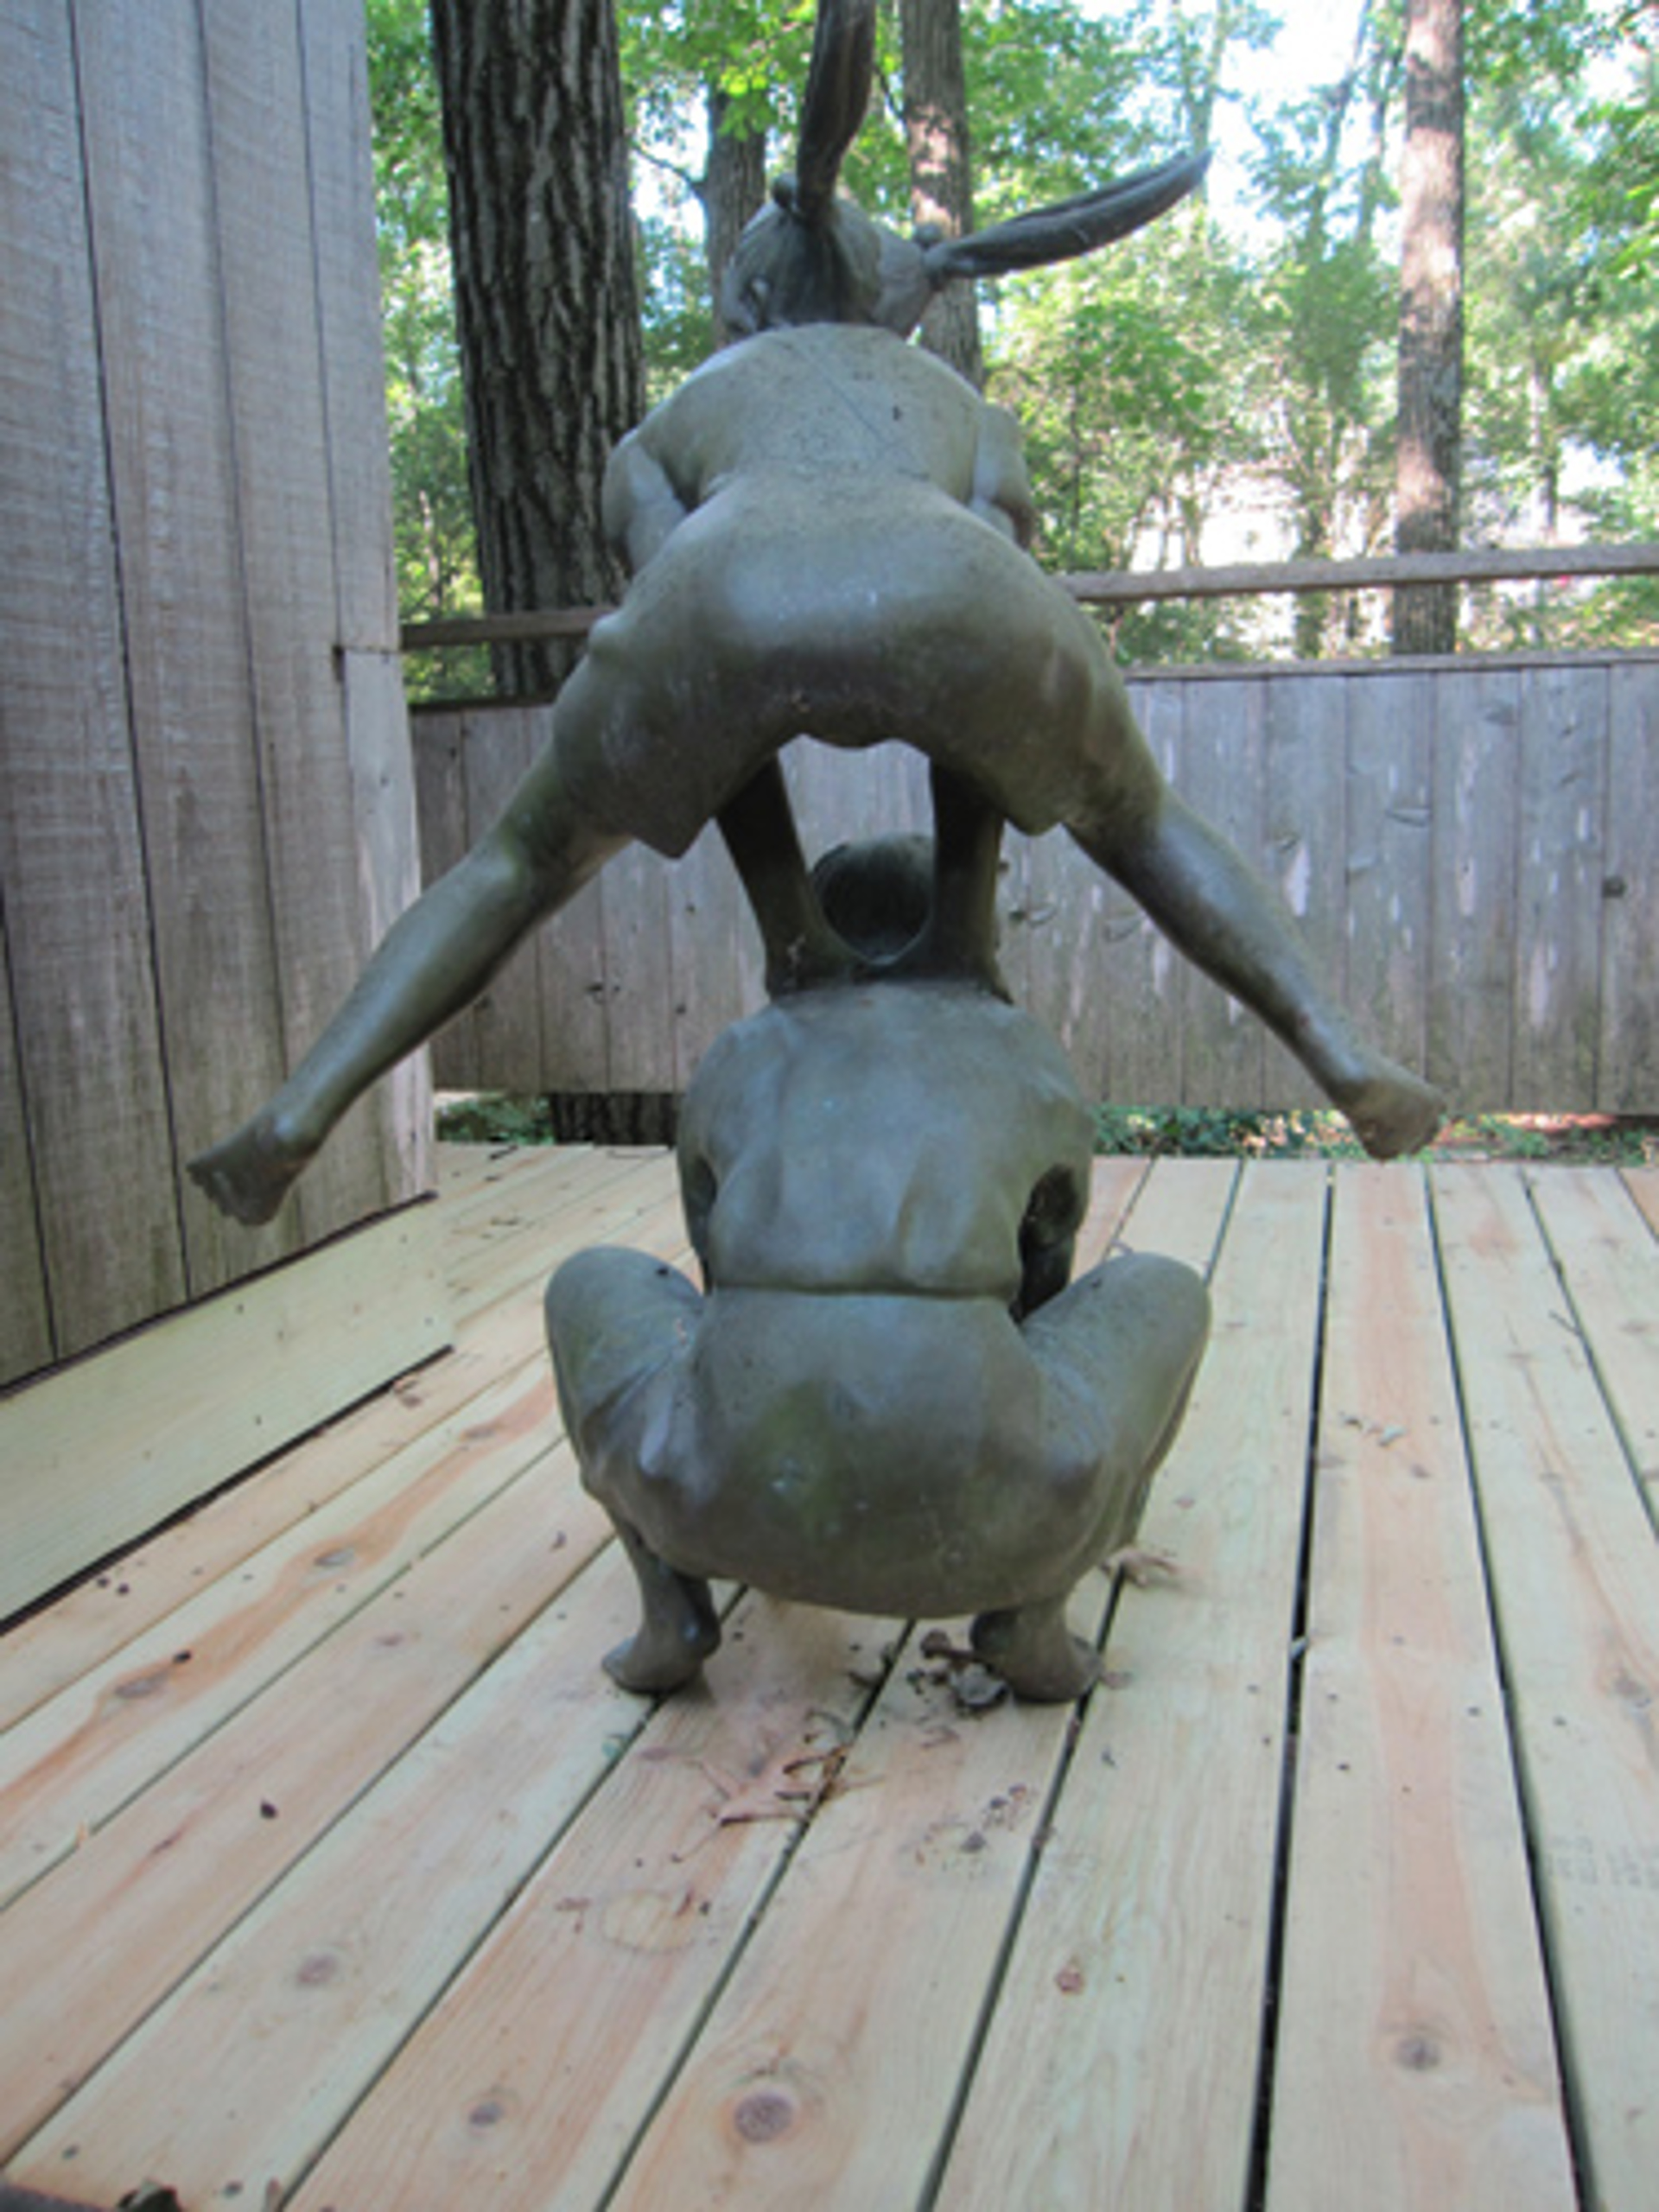 Leap Frog Children by Moreau (inspired by a design by A. Moreau)